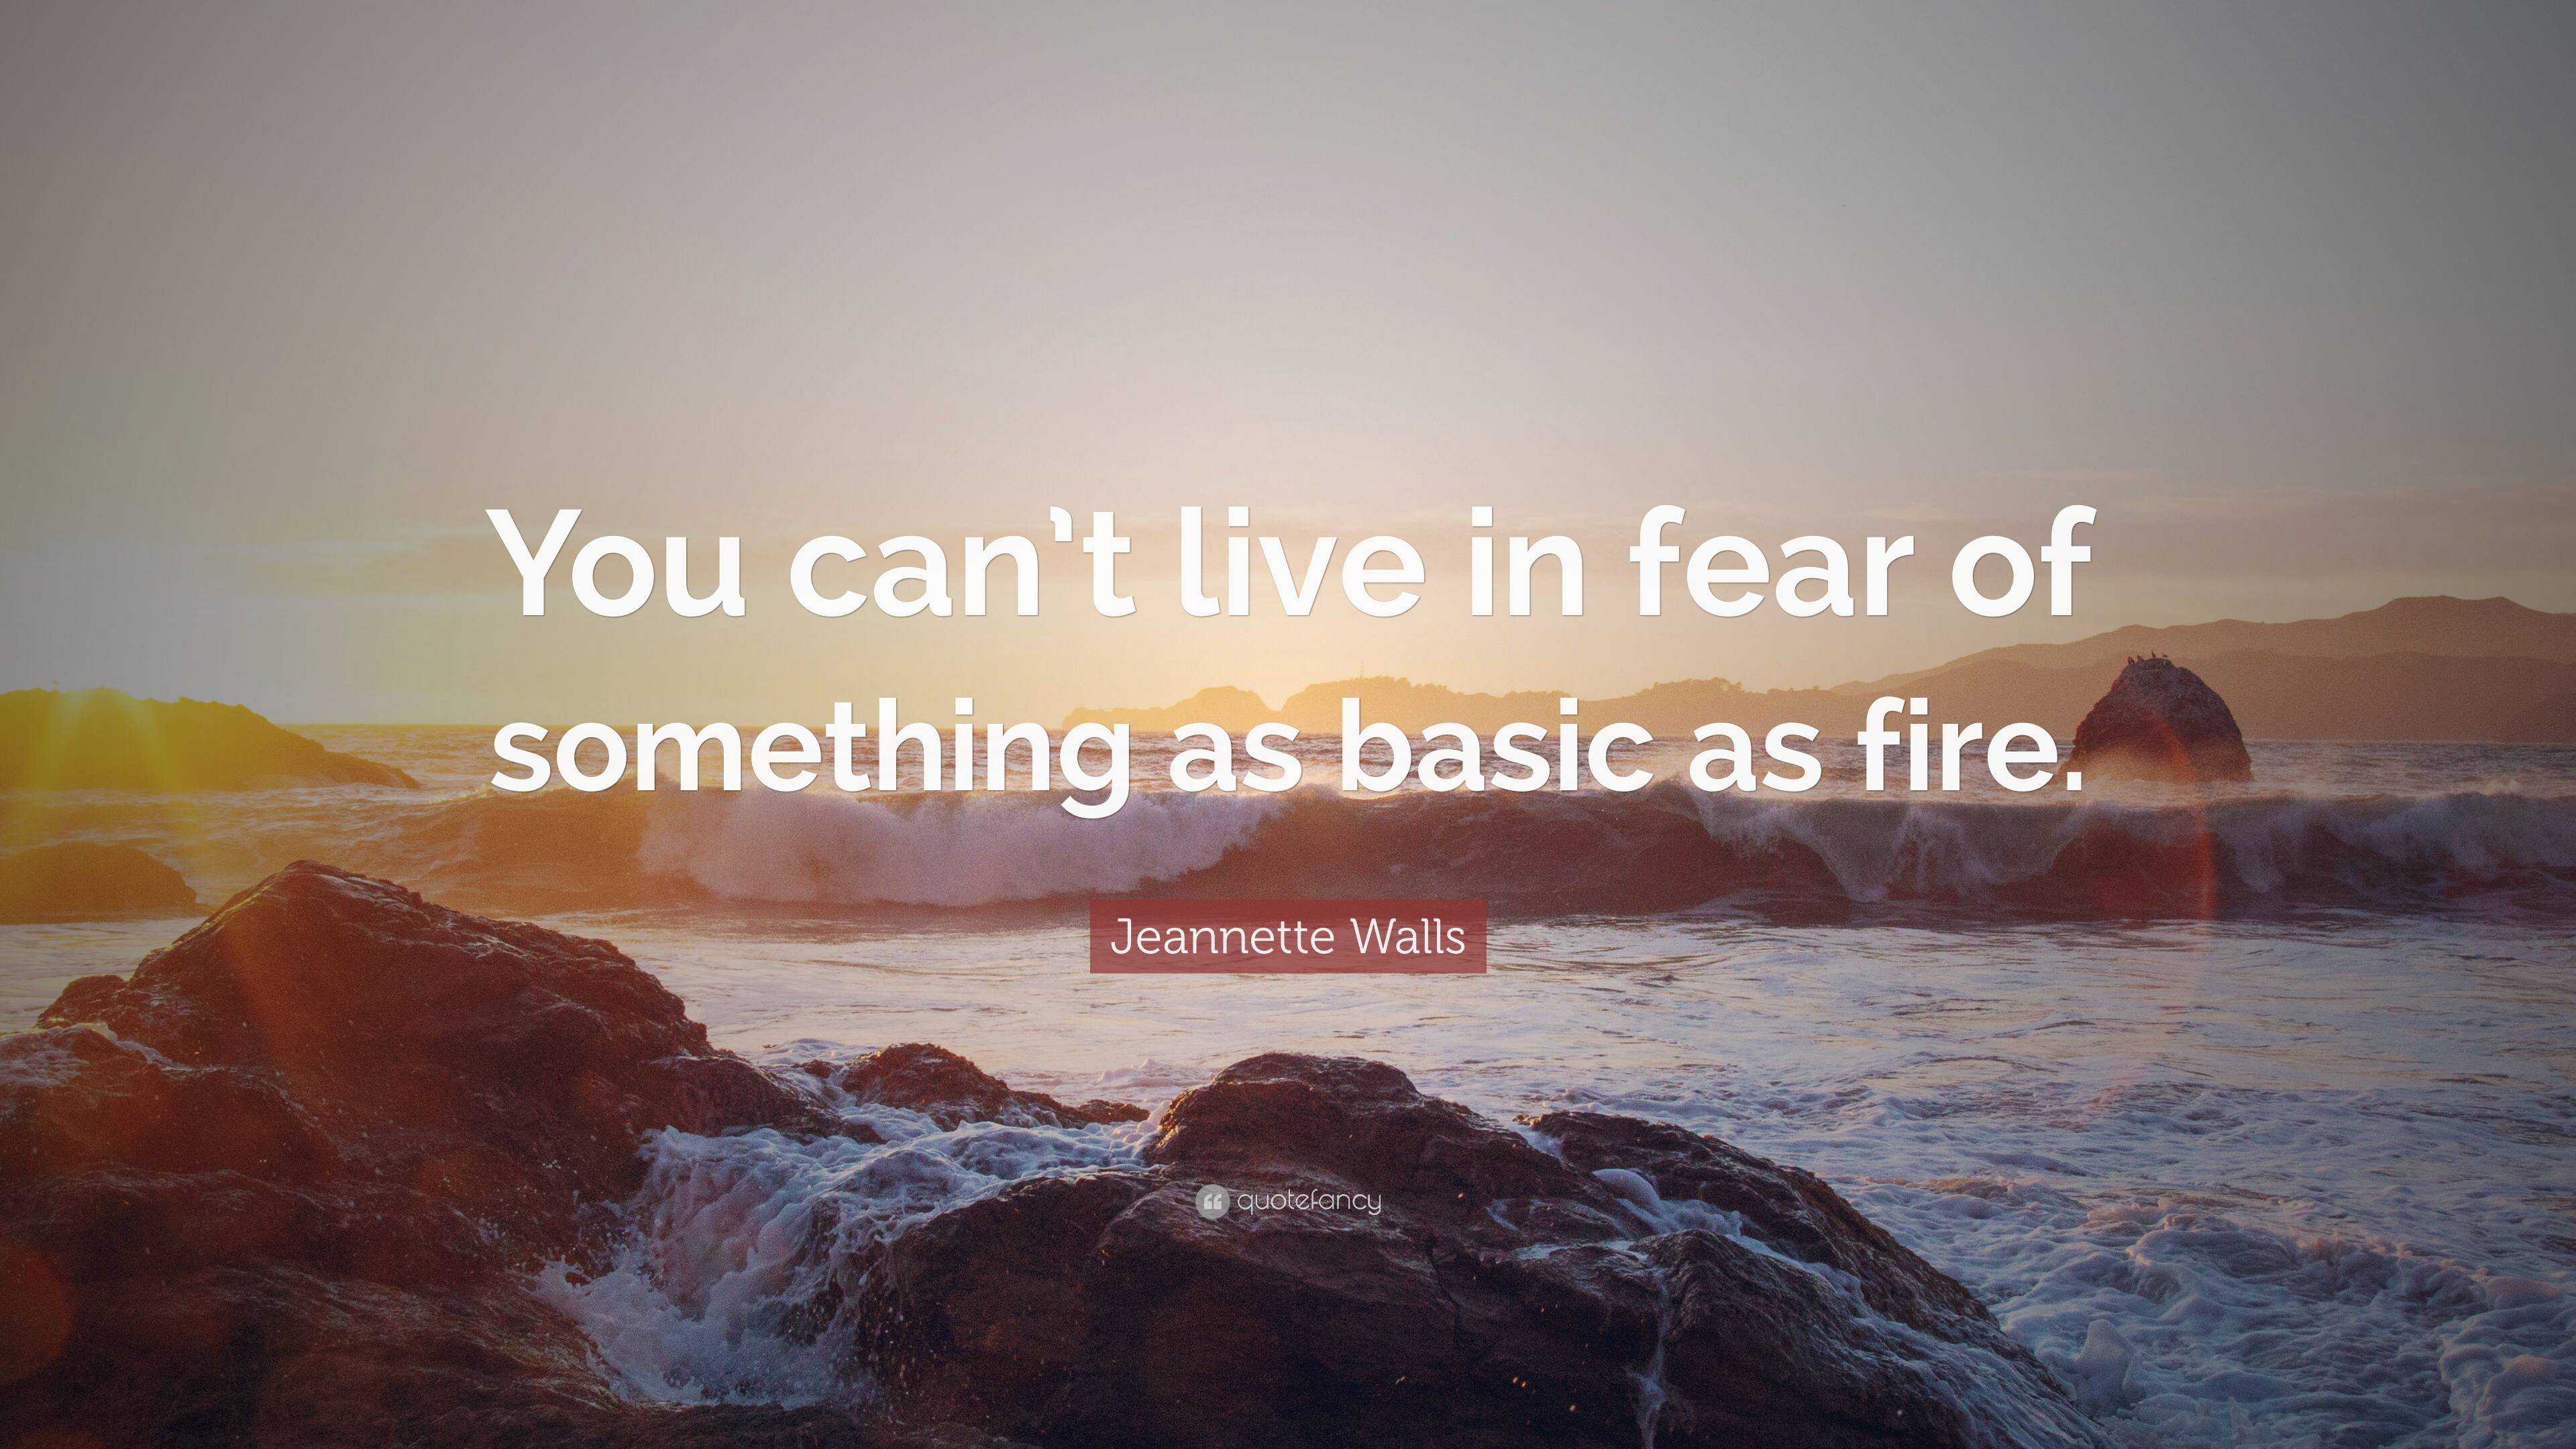 Jeannette Walls Quote: “You can’t live in fear of something as basic as ...